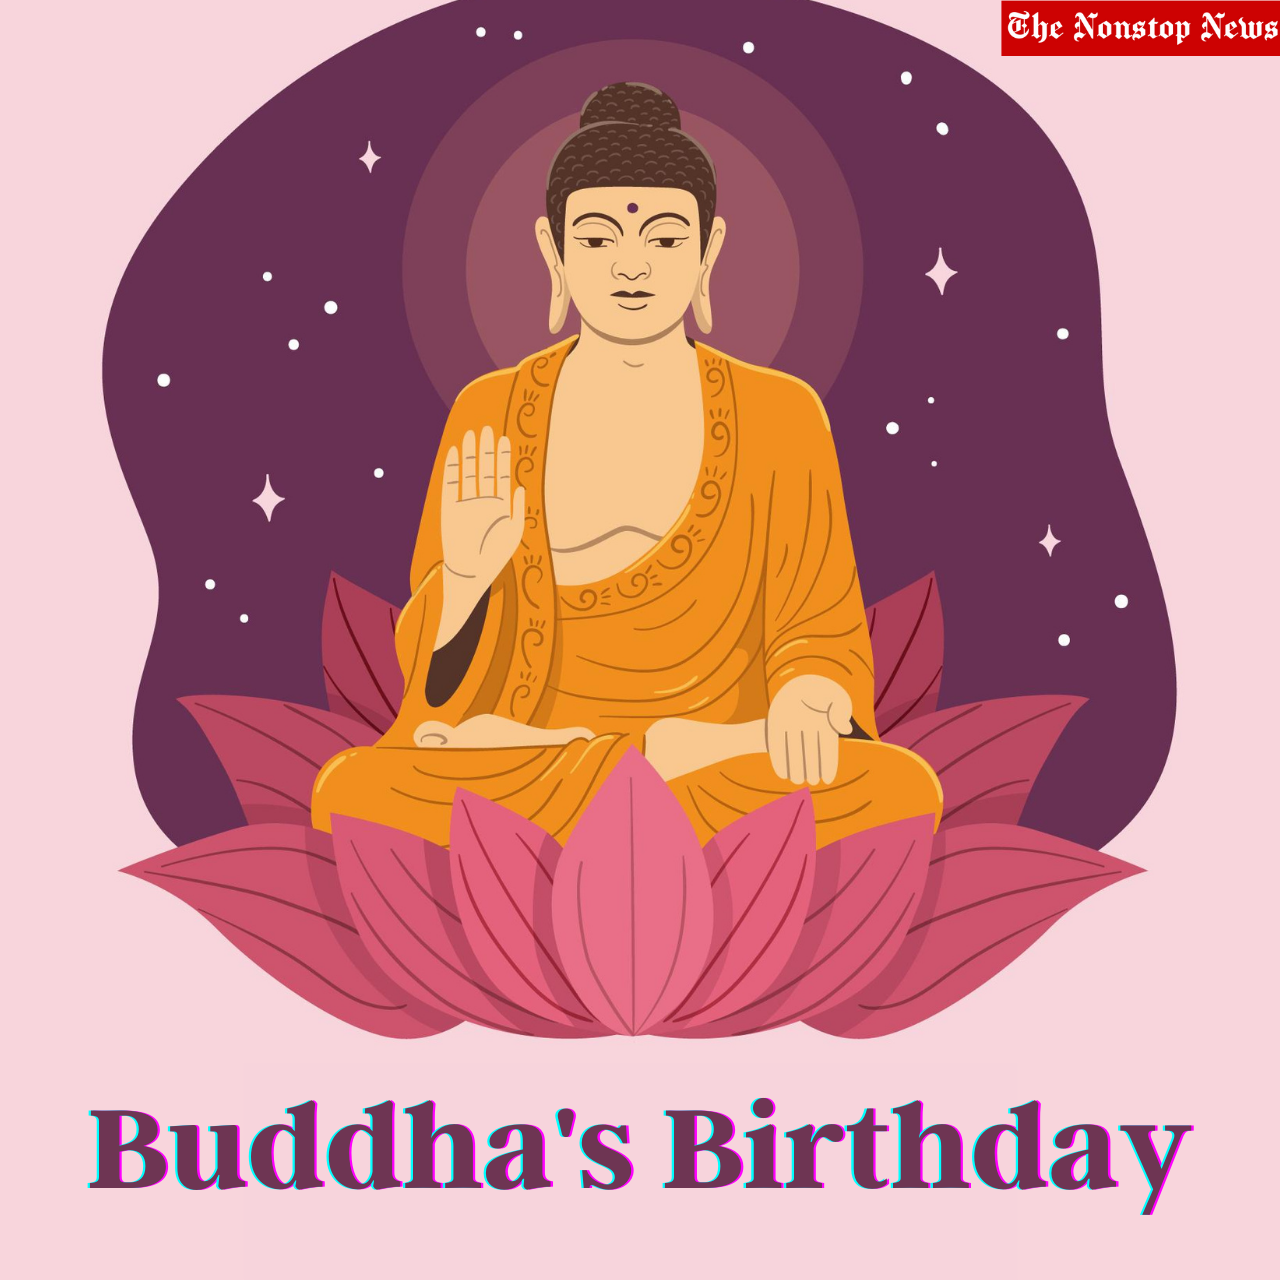 Buddha's Birthday 2022: Best Quotes, Greetings, Images, Messages, Wishes, Sayings To Share